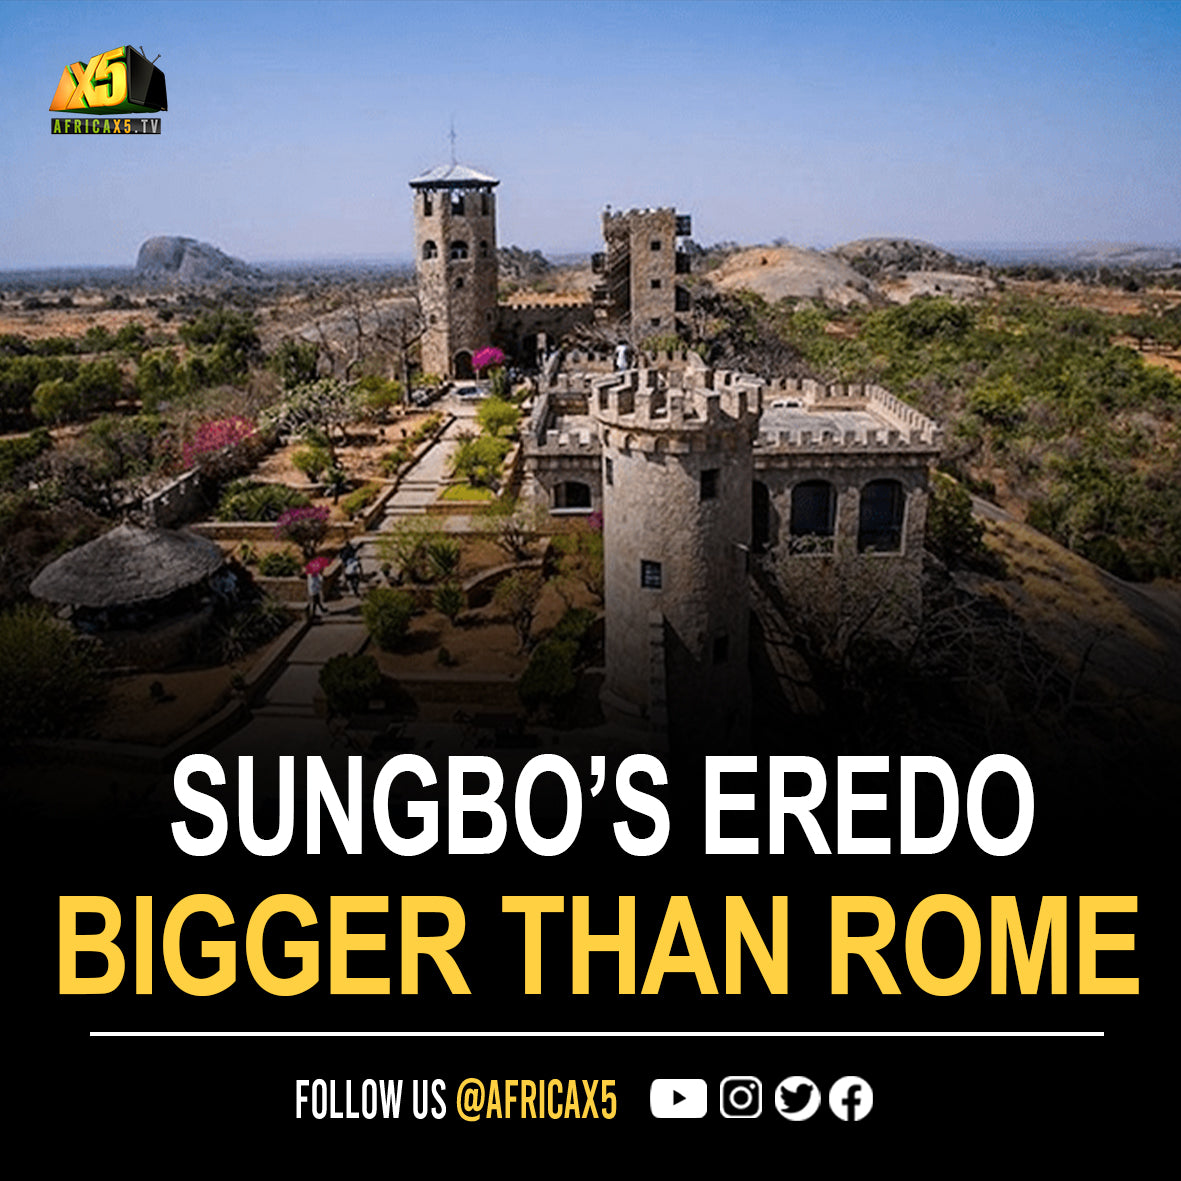 Nigeria’s Ancient City, Sungbo’s Eredo, was bigger than Rome and Cairo when built